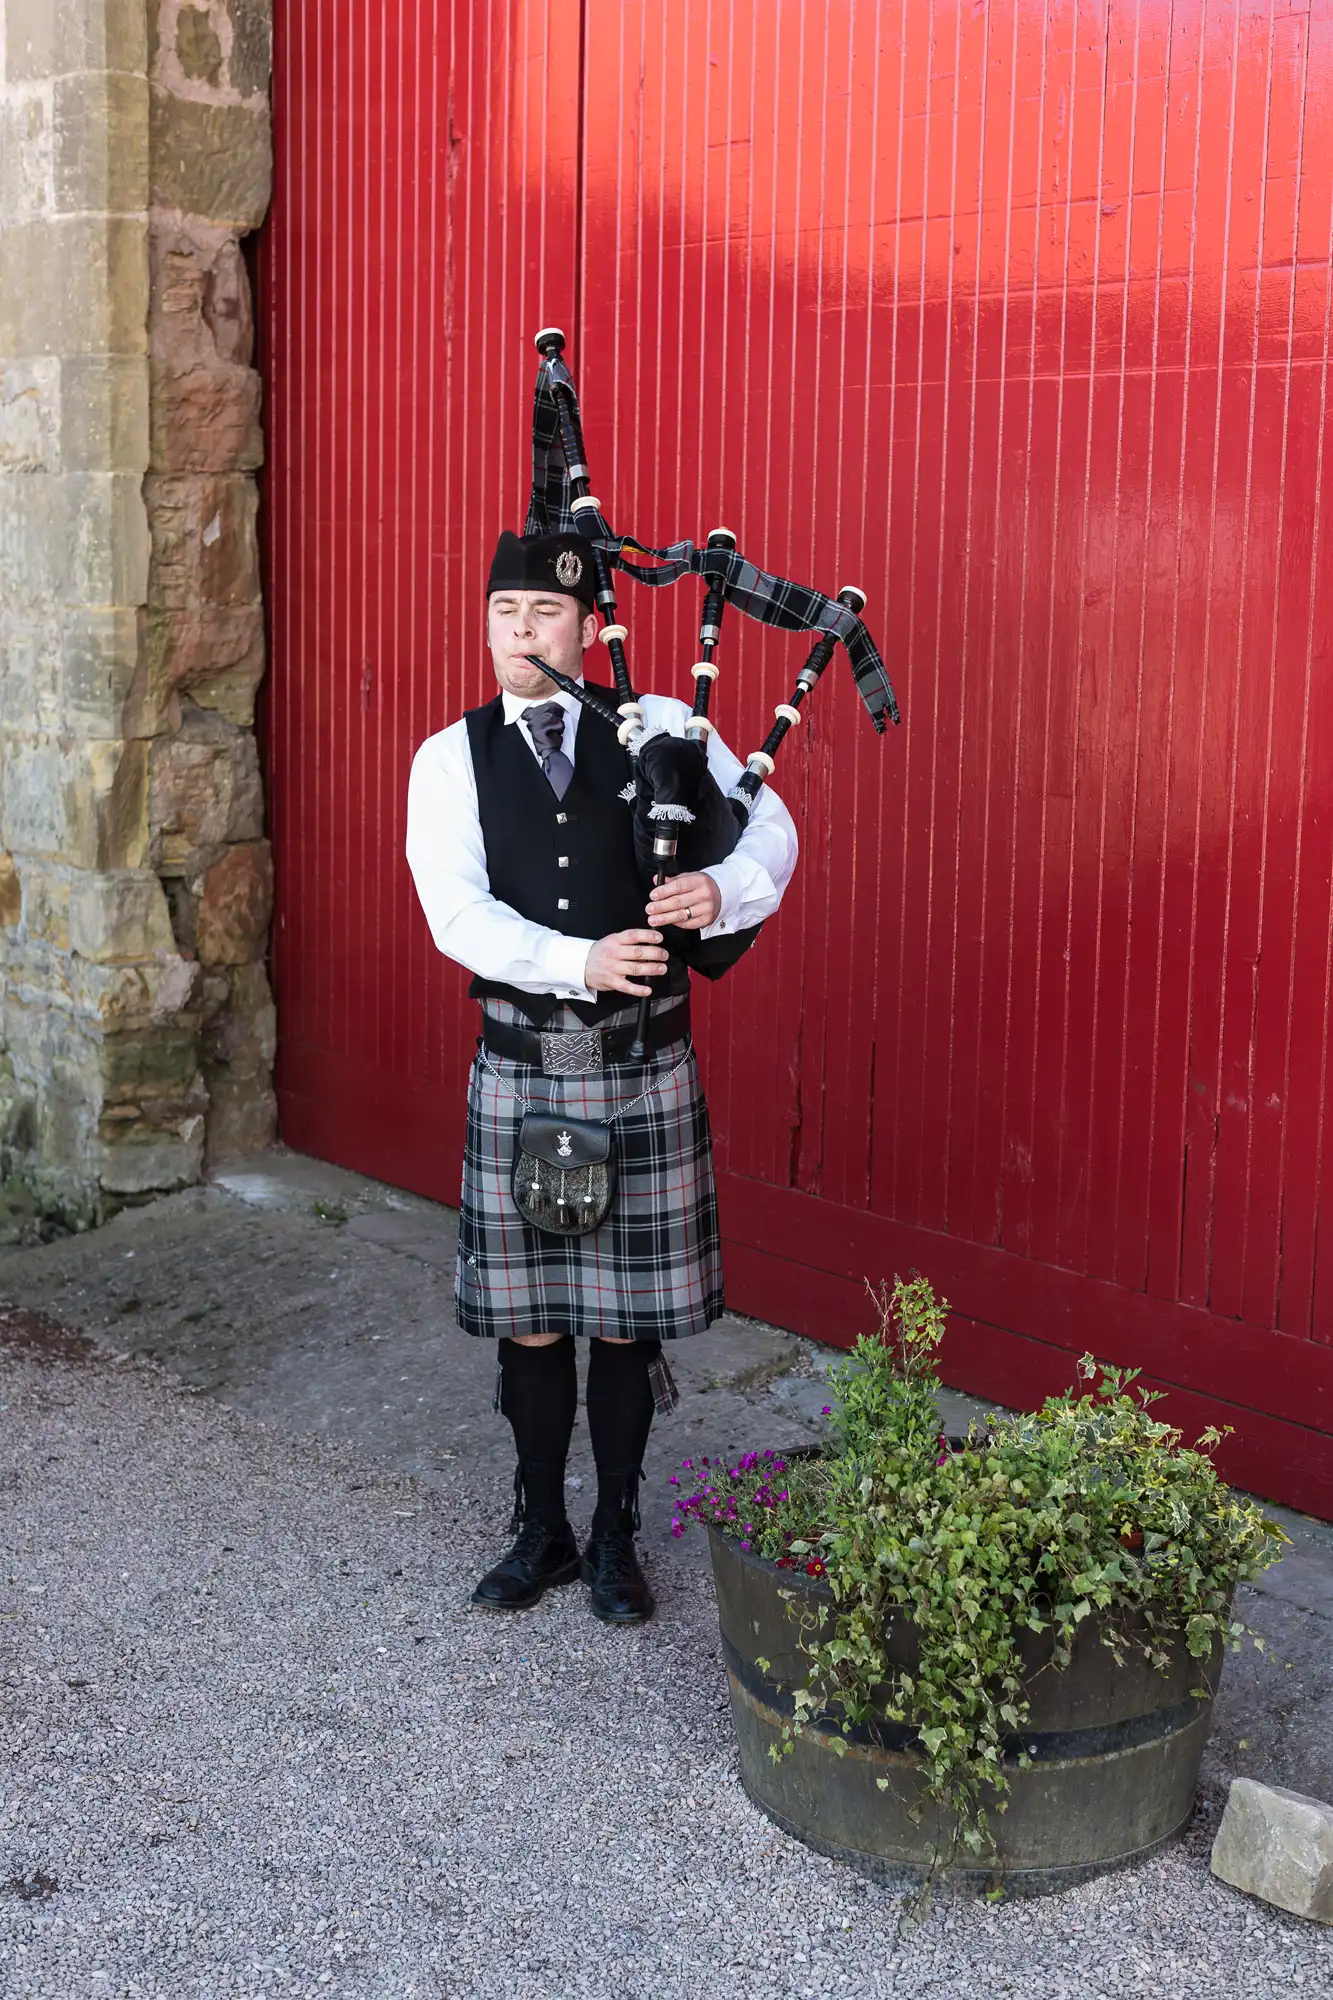 A man in traditional scottish attire, including a kilt and sporran, plays bagpipes beside a red wall and a planter with flowers.